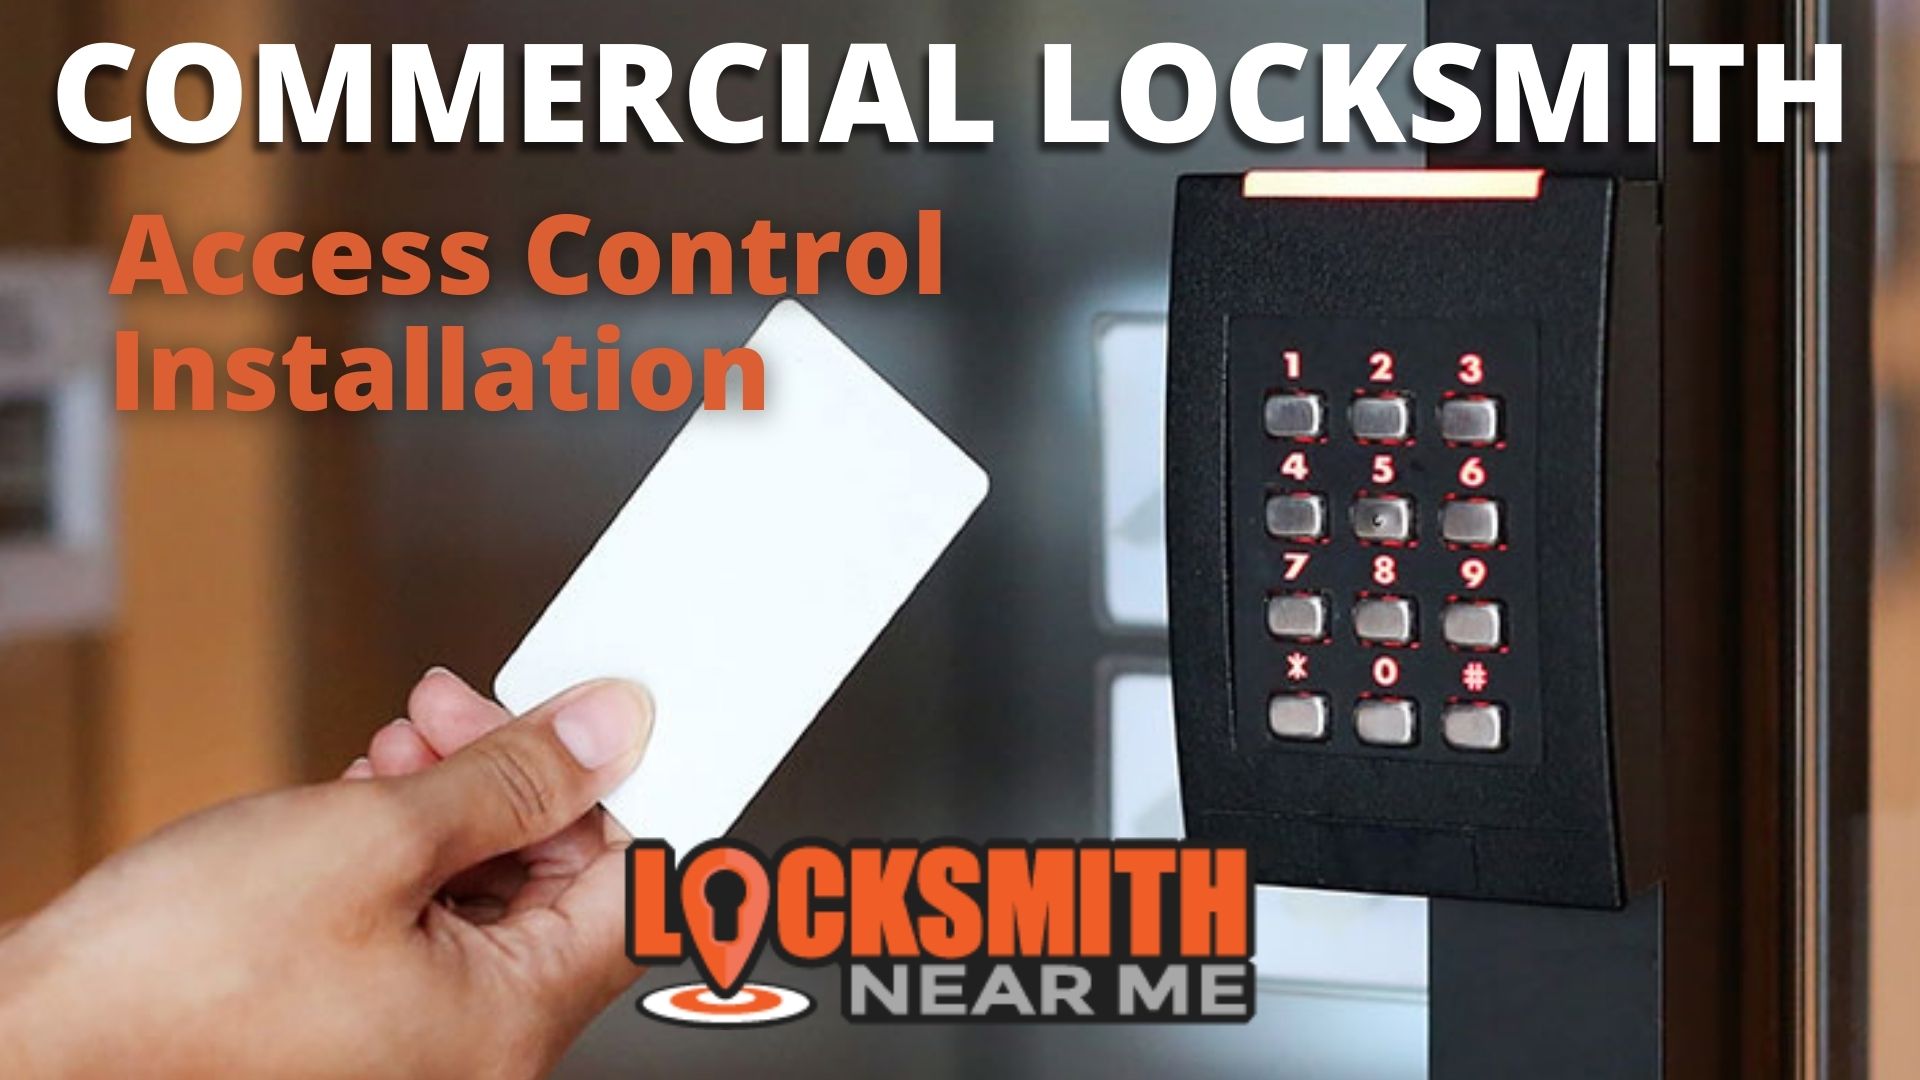 Commercial Locksmith Access Control